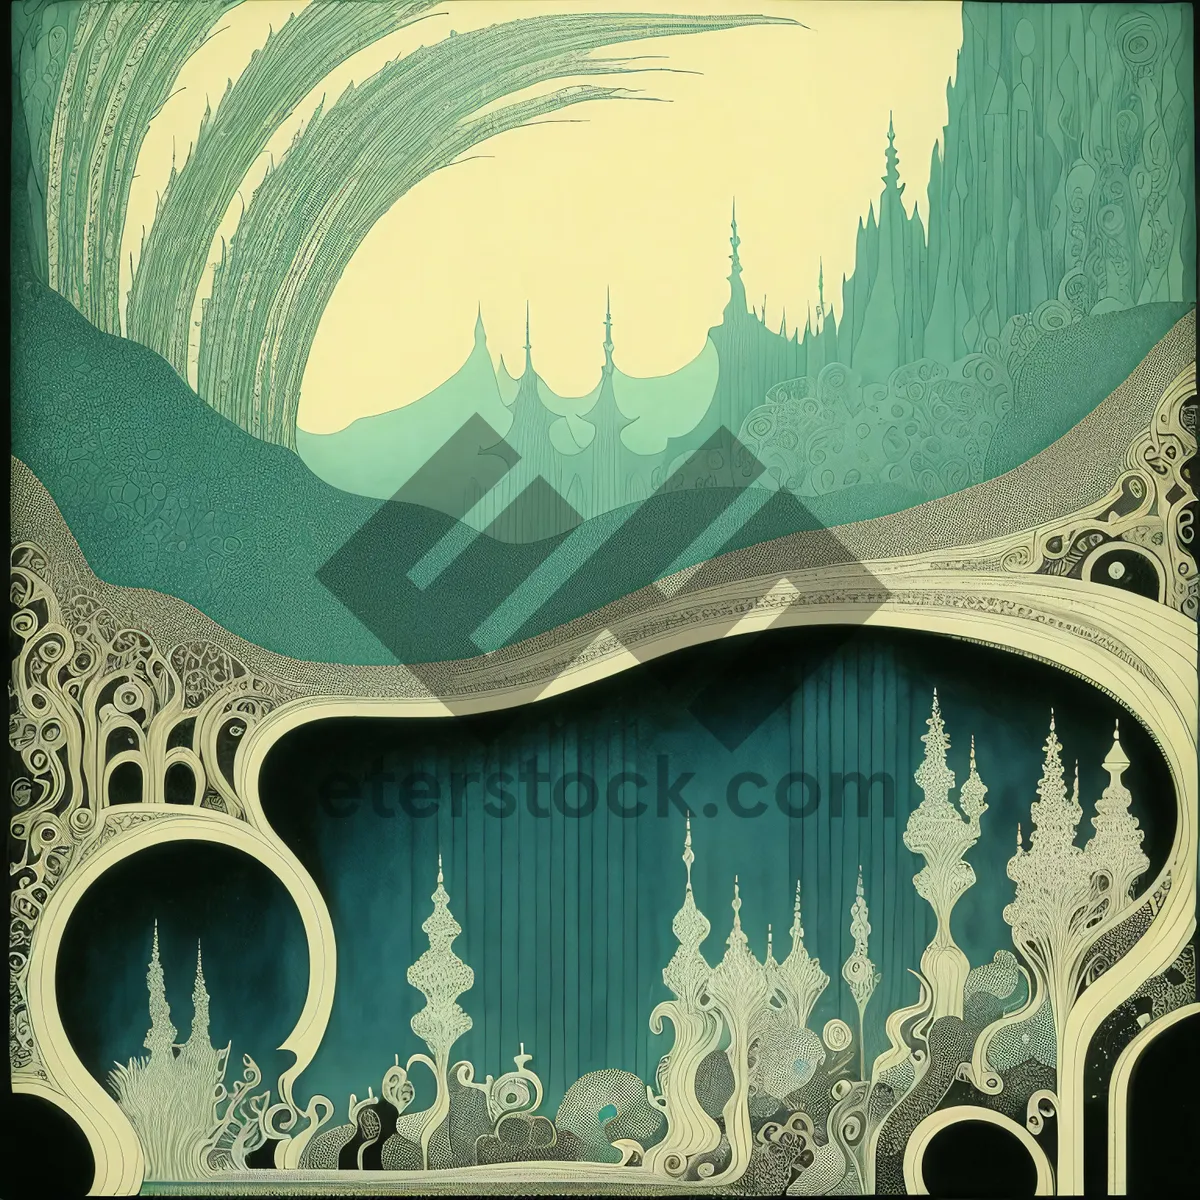 Picture of Winter Wonderland Silhouette: Festive Snowflake Decor on Grunge Patterned Curtain